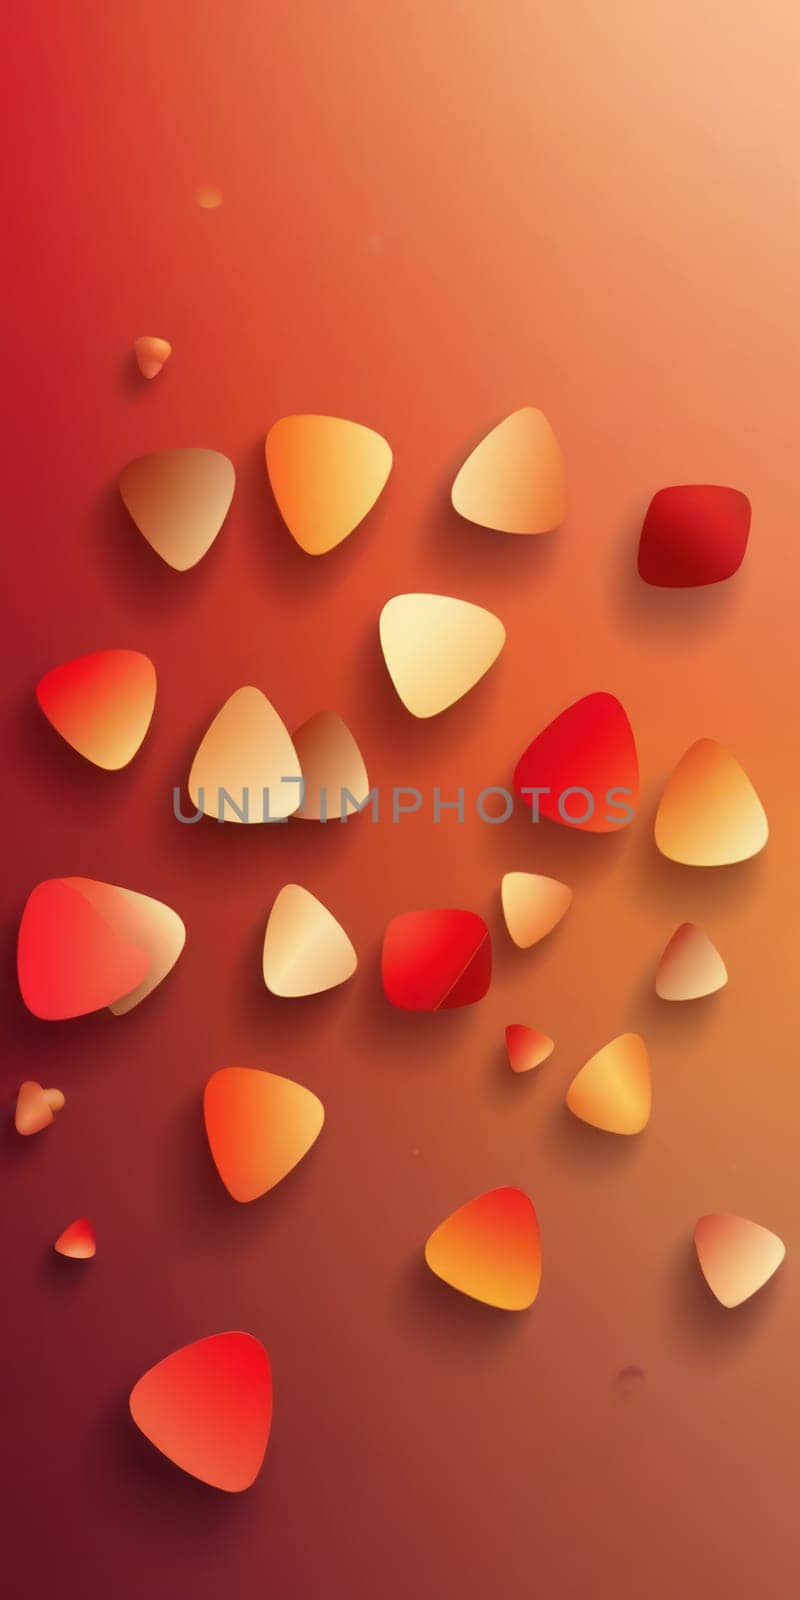 Plectrum Shapes in Red and Brown by nkotlyar